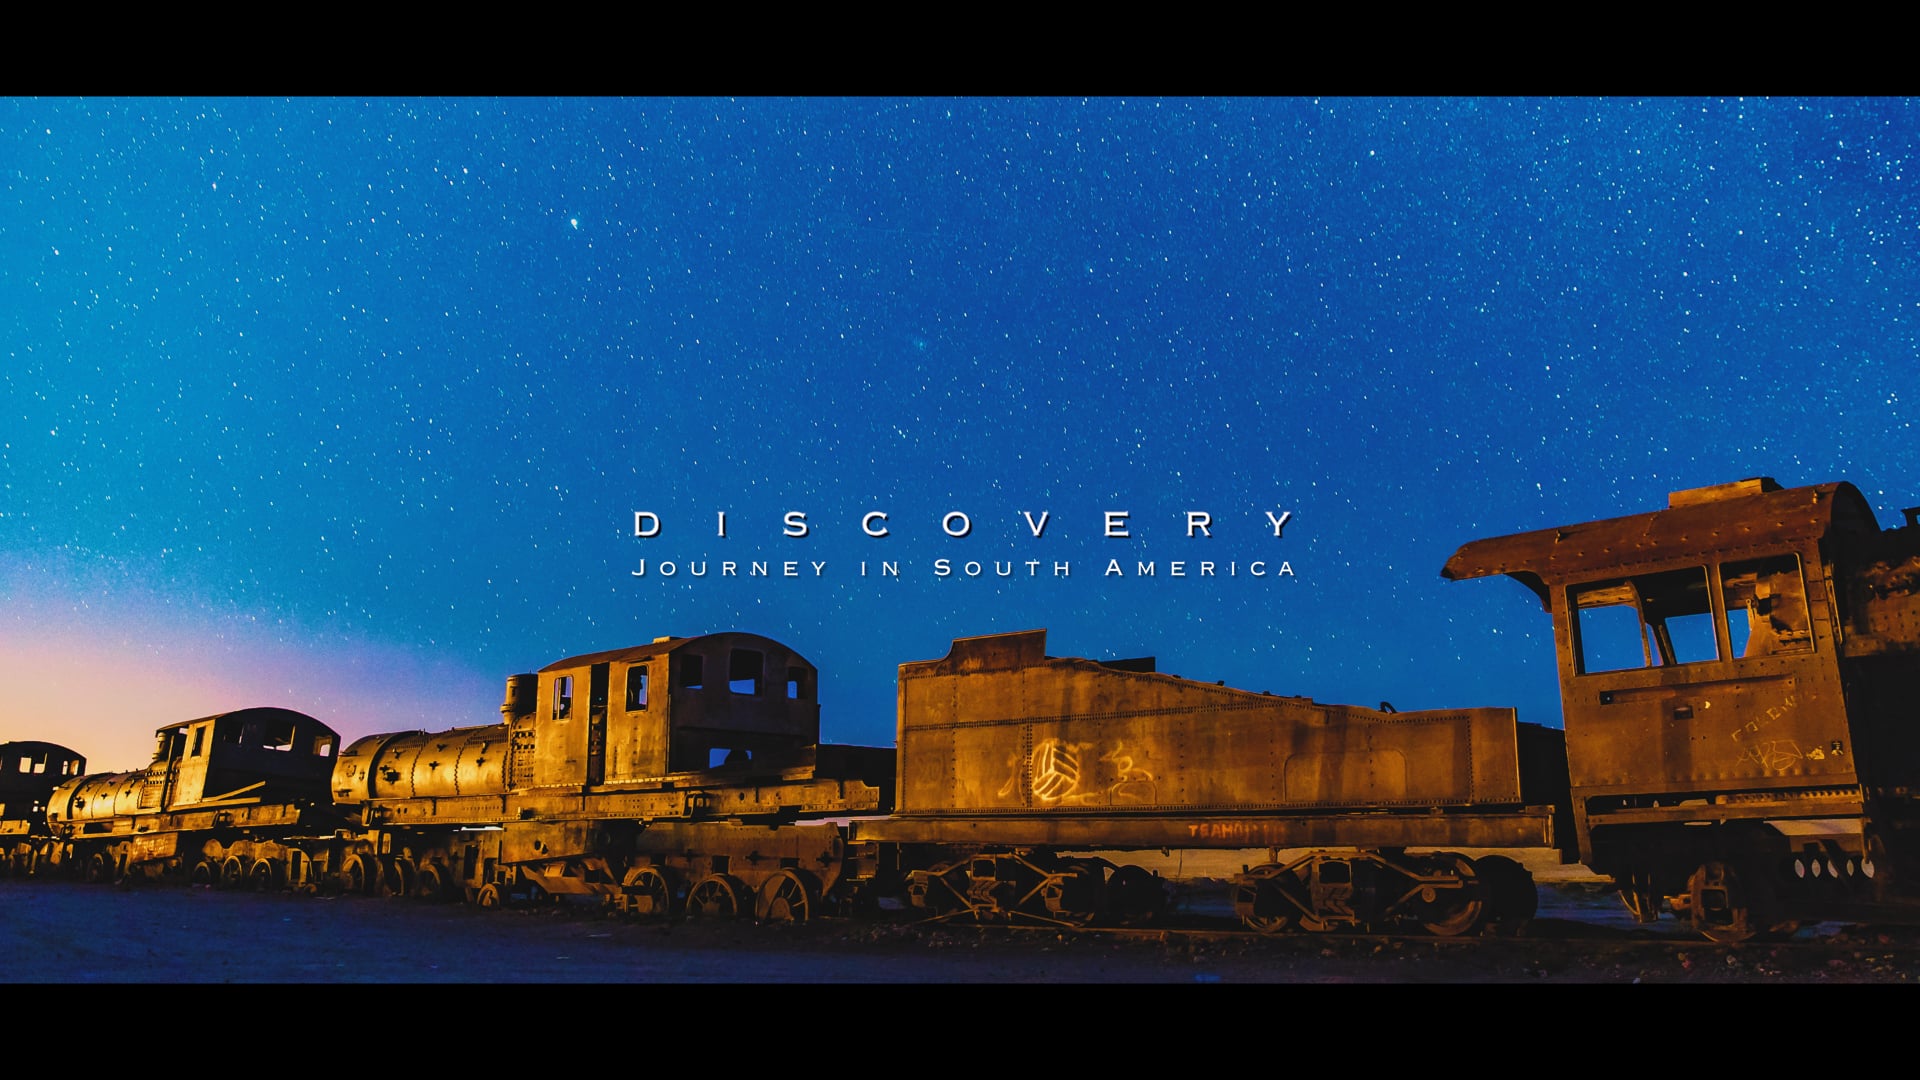 DISCOVERY  Journey in South America